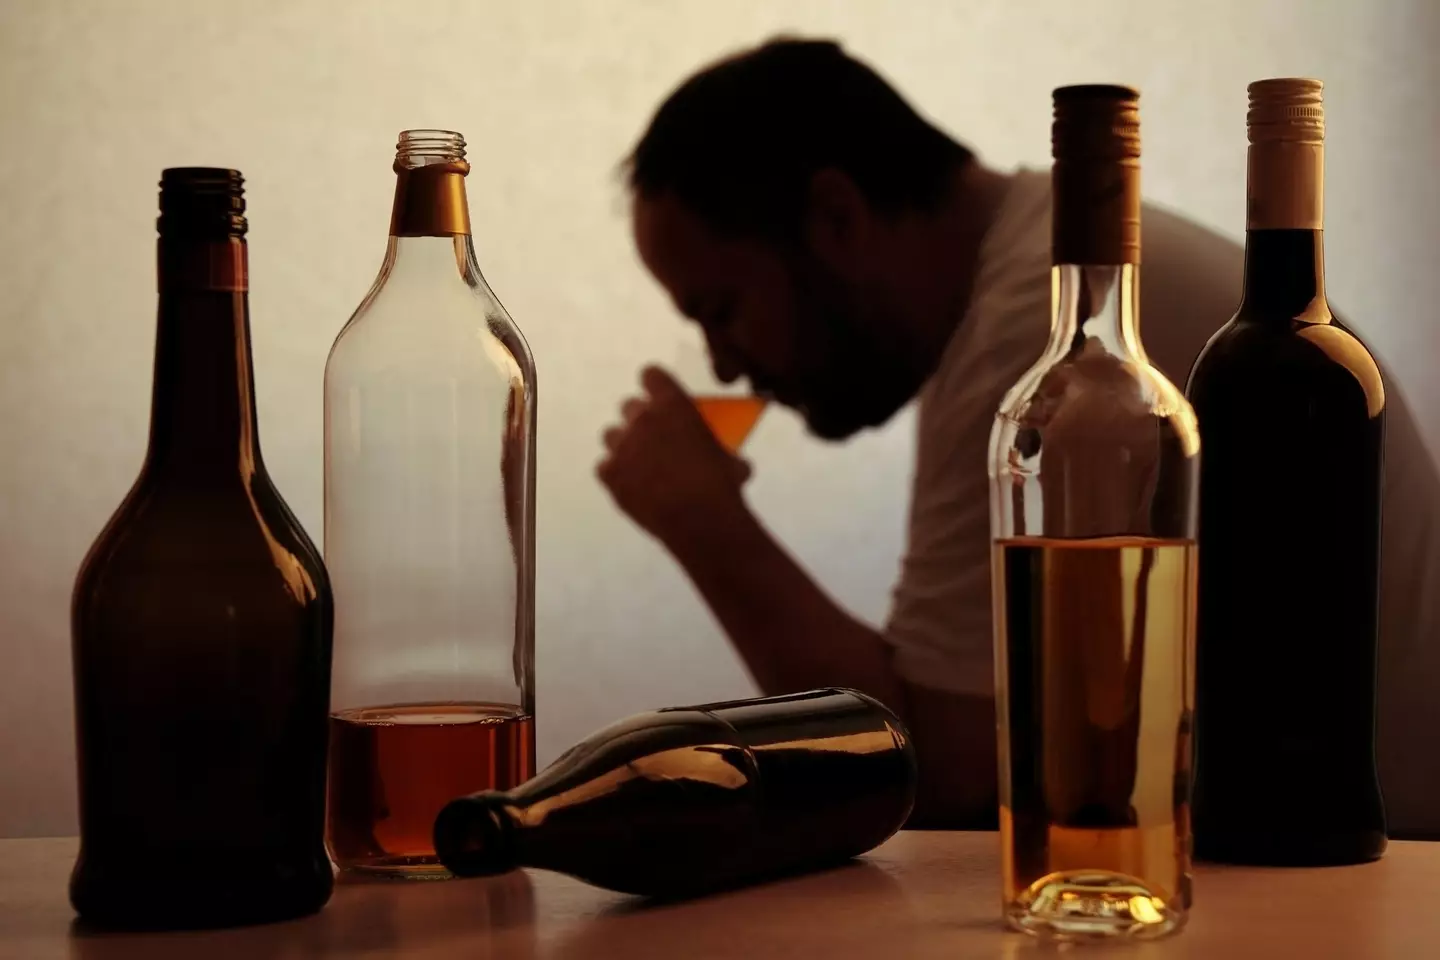 Should you cut out alcohol completely if you think your relationship with it has become problematic?